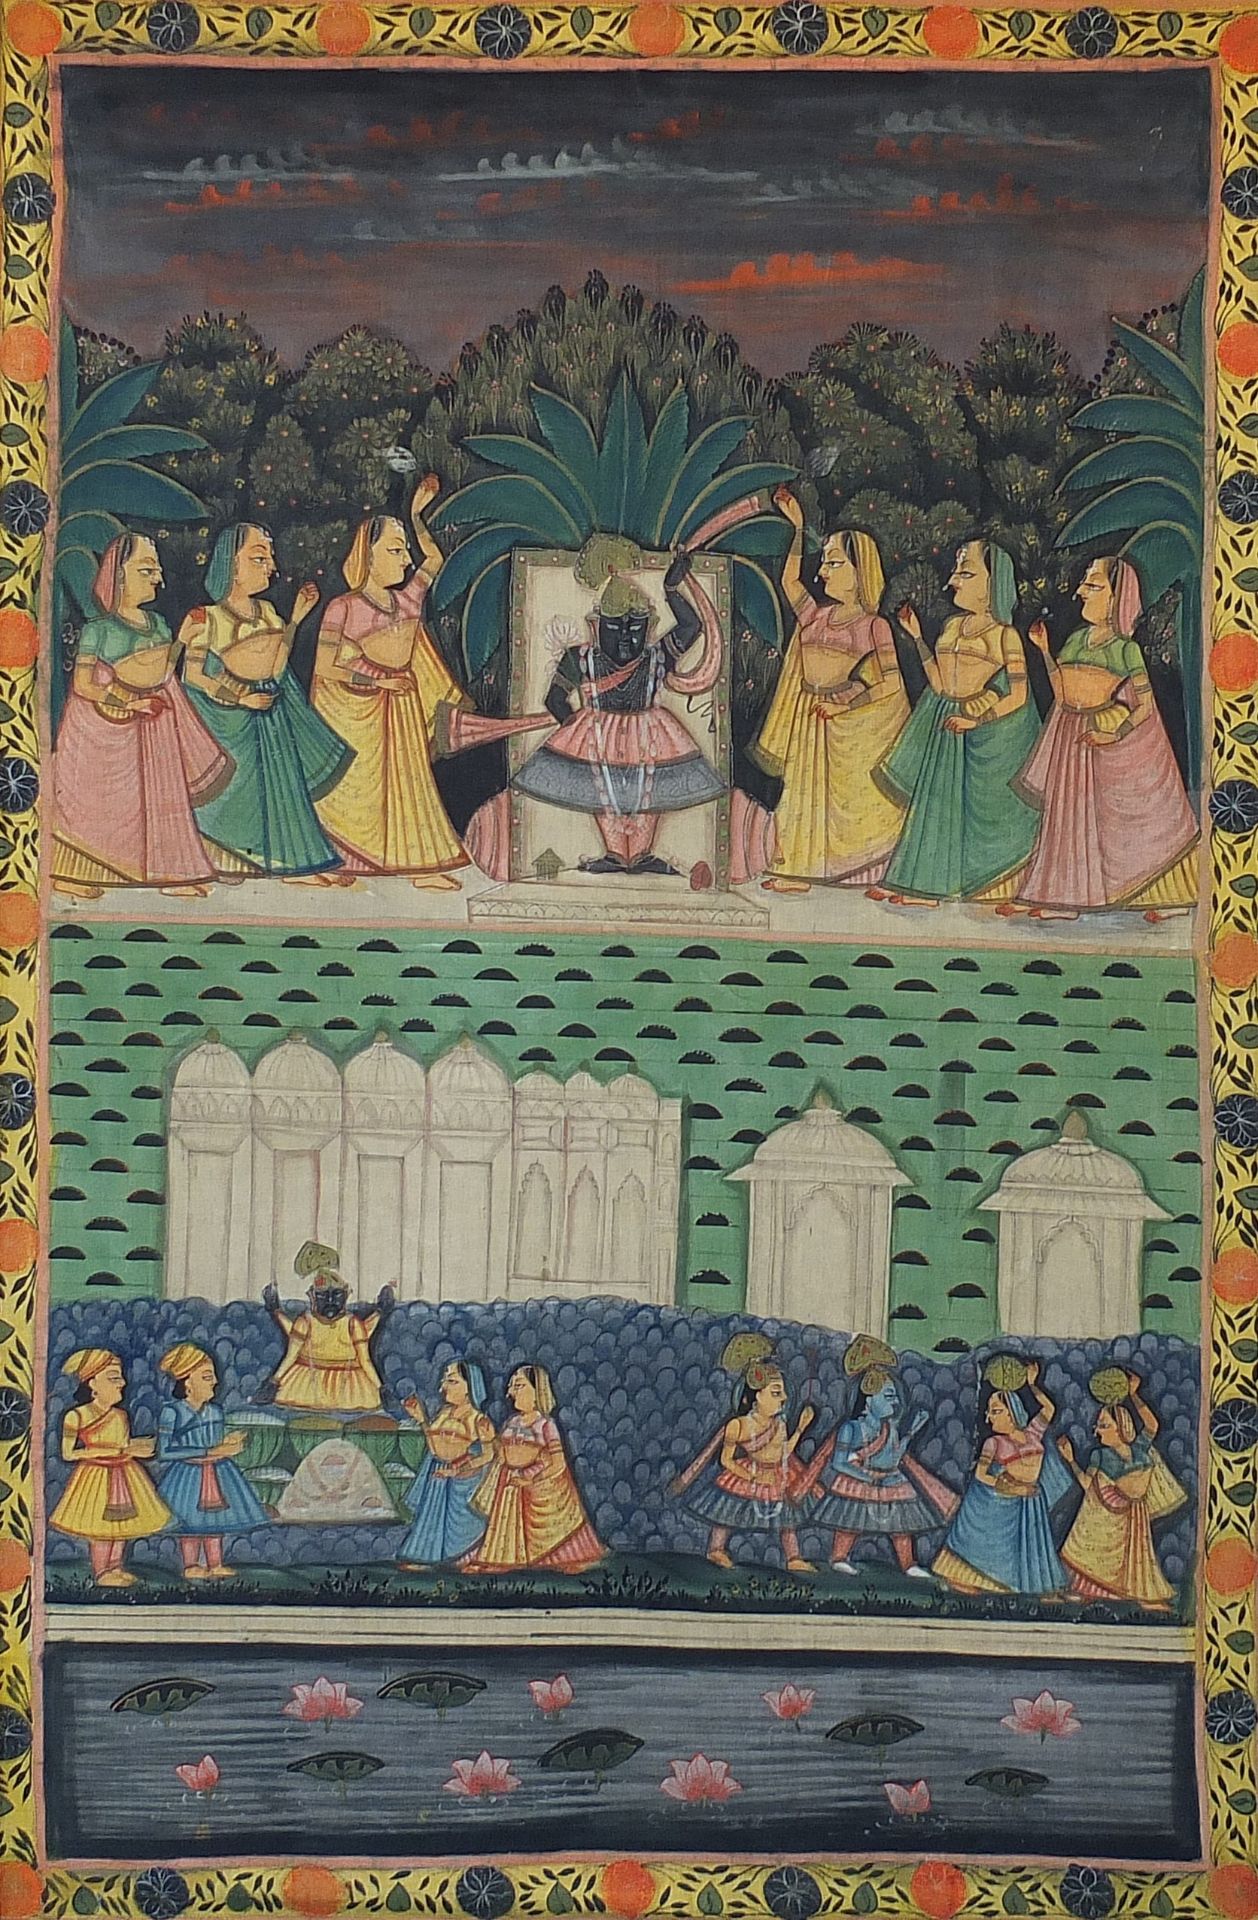 Figures worshipping, Indian Mughal school textile, framed, 168cm x 112cm excluding the frame